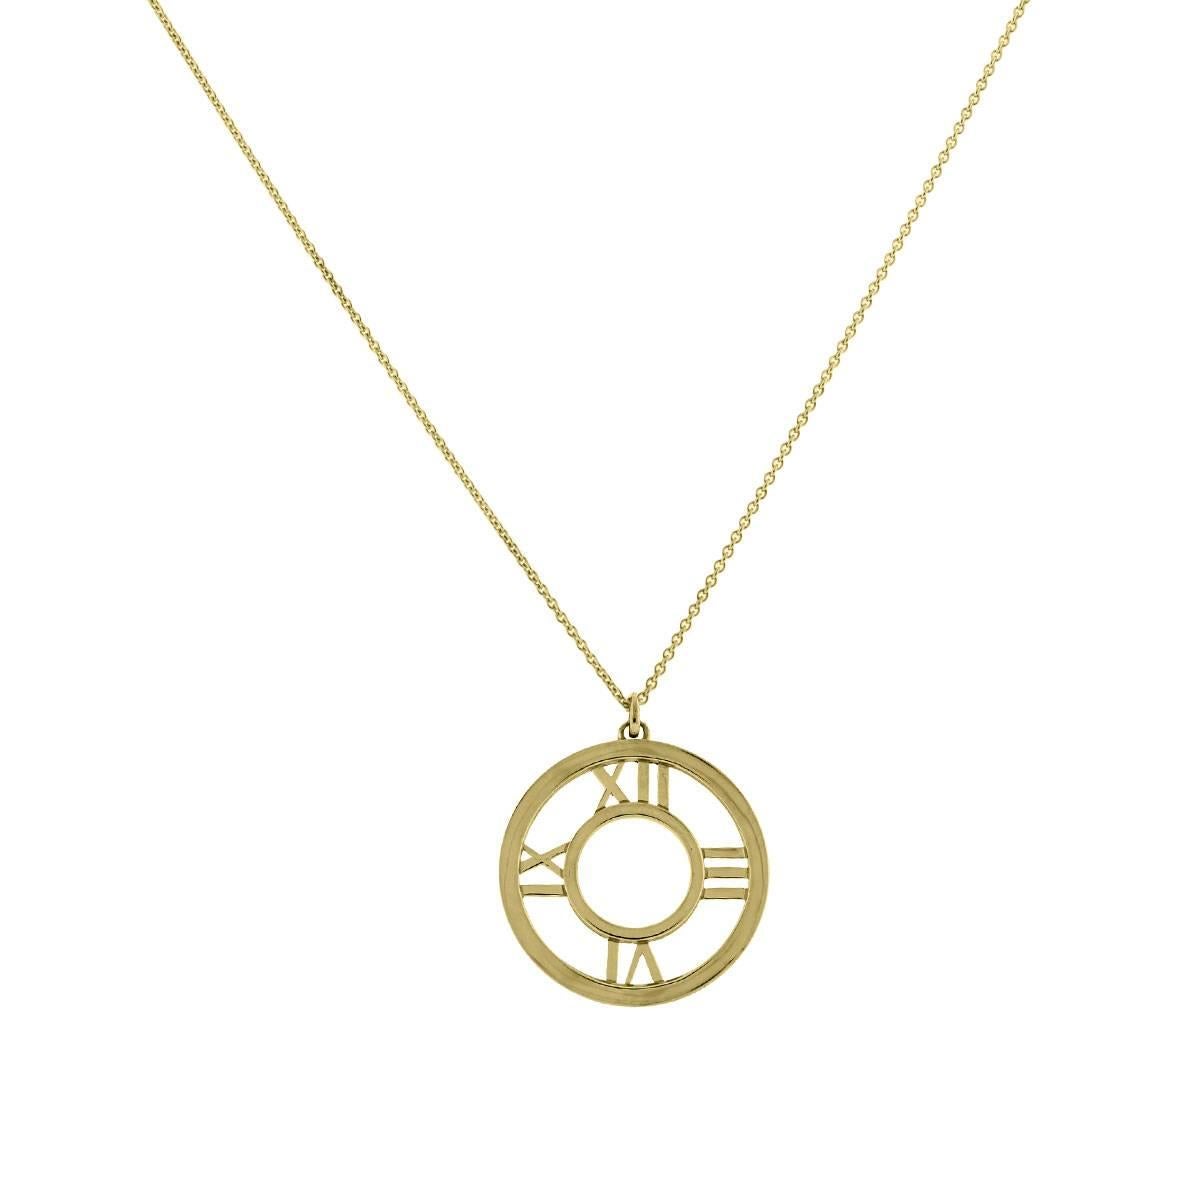 Designer: Tiffany & Co. 
Style	: 18k Yellow Gold Large Atlas Pendant Necklace
Material: 18k Yellow Gold
Total Item Weight: 17.4g (11.2dwt)
Necklace Length: Chain is 18